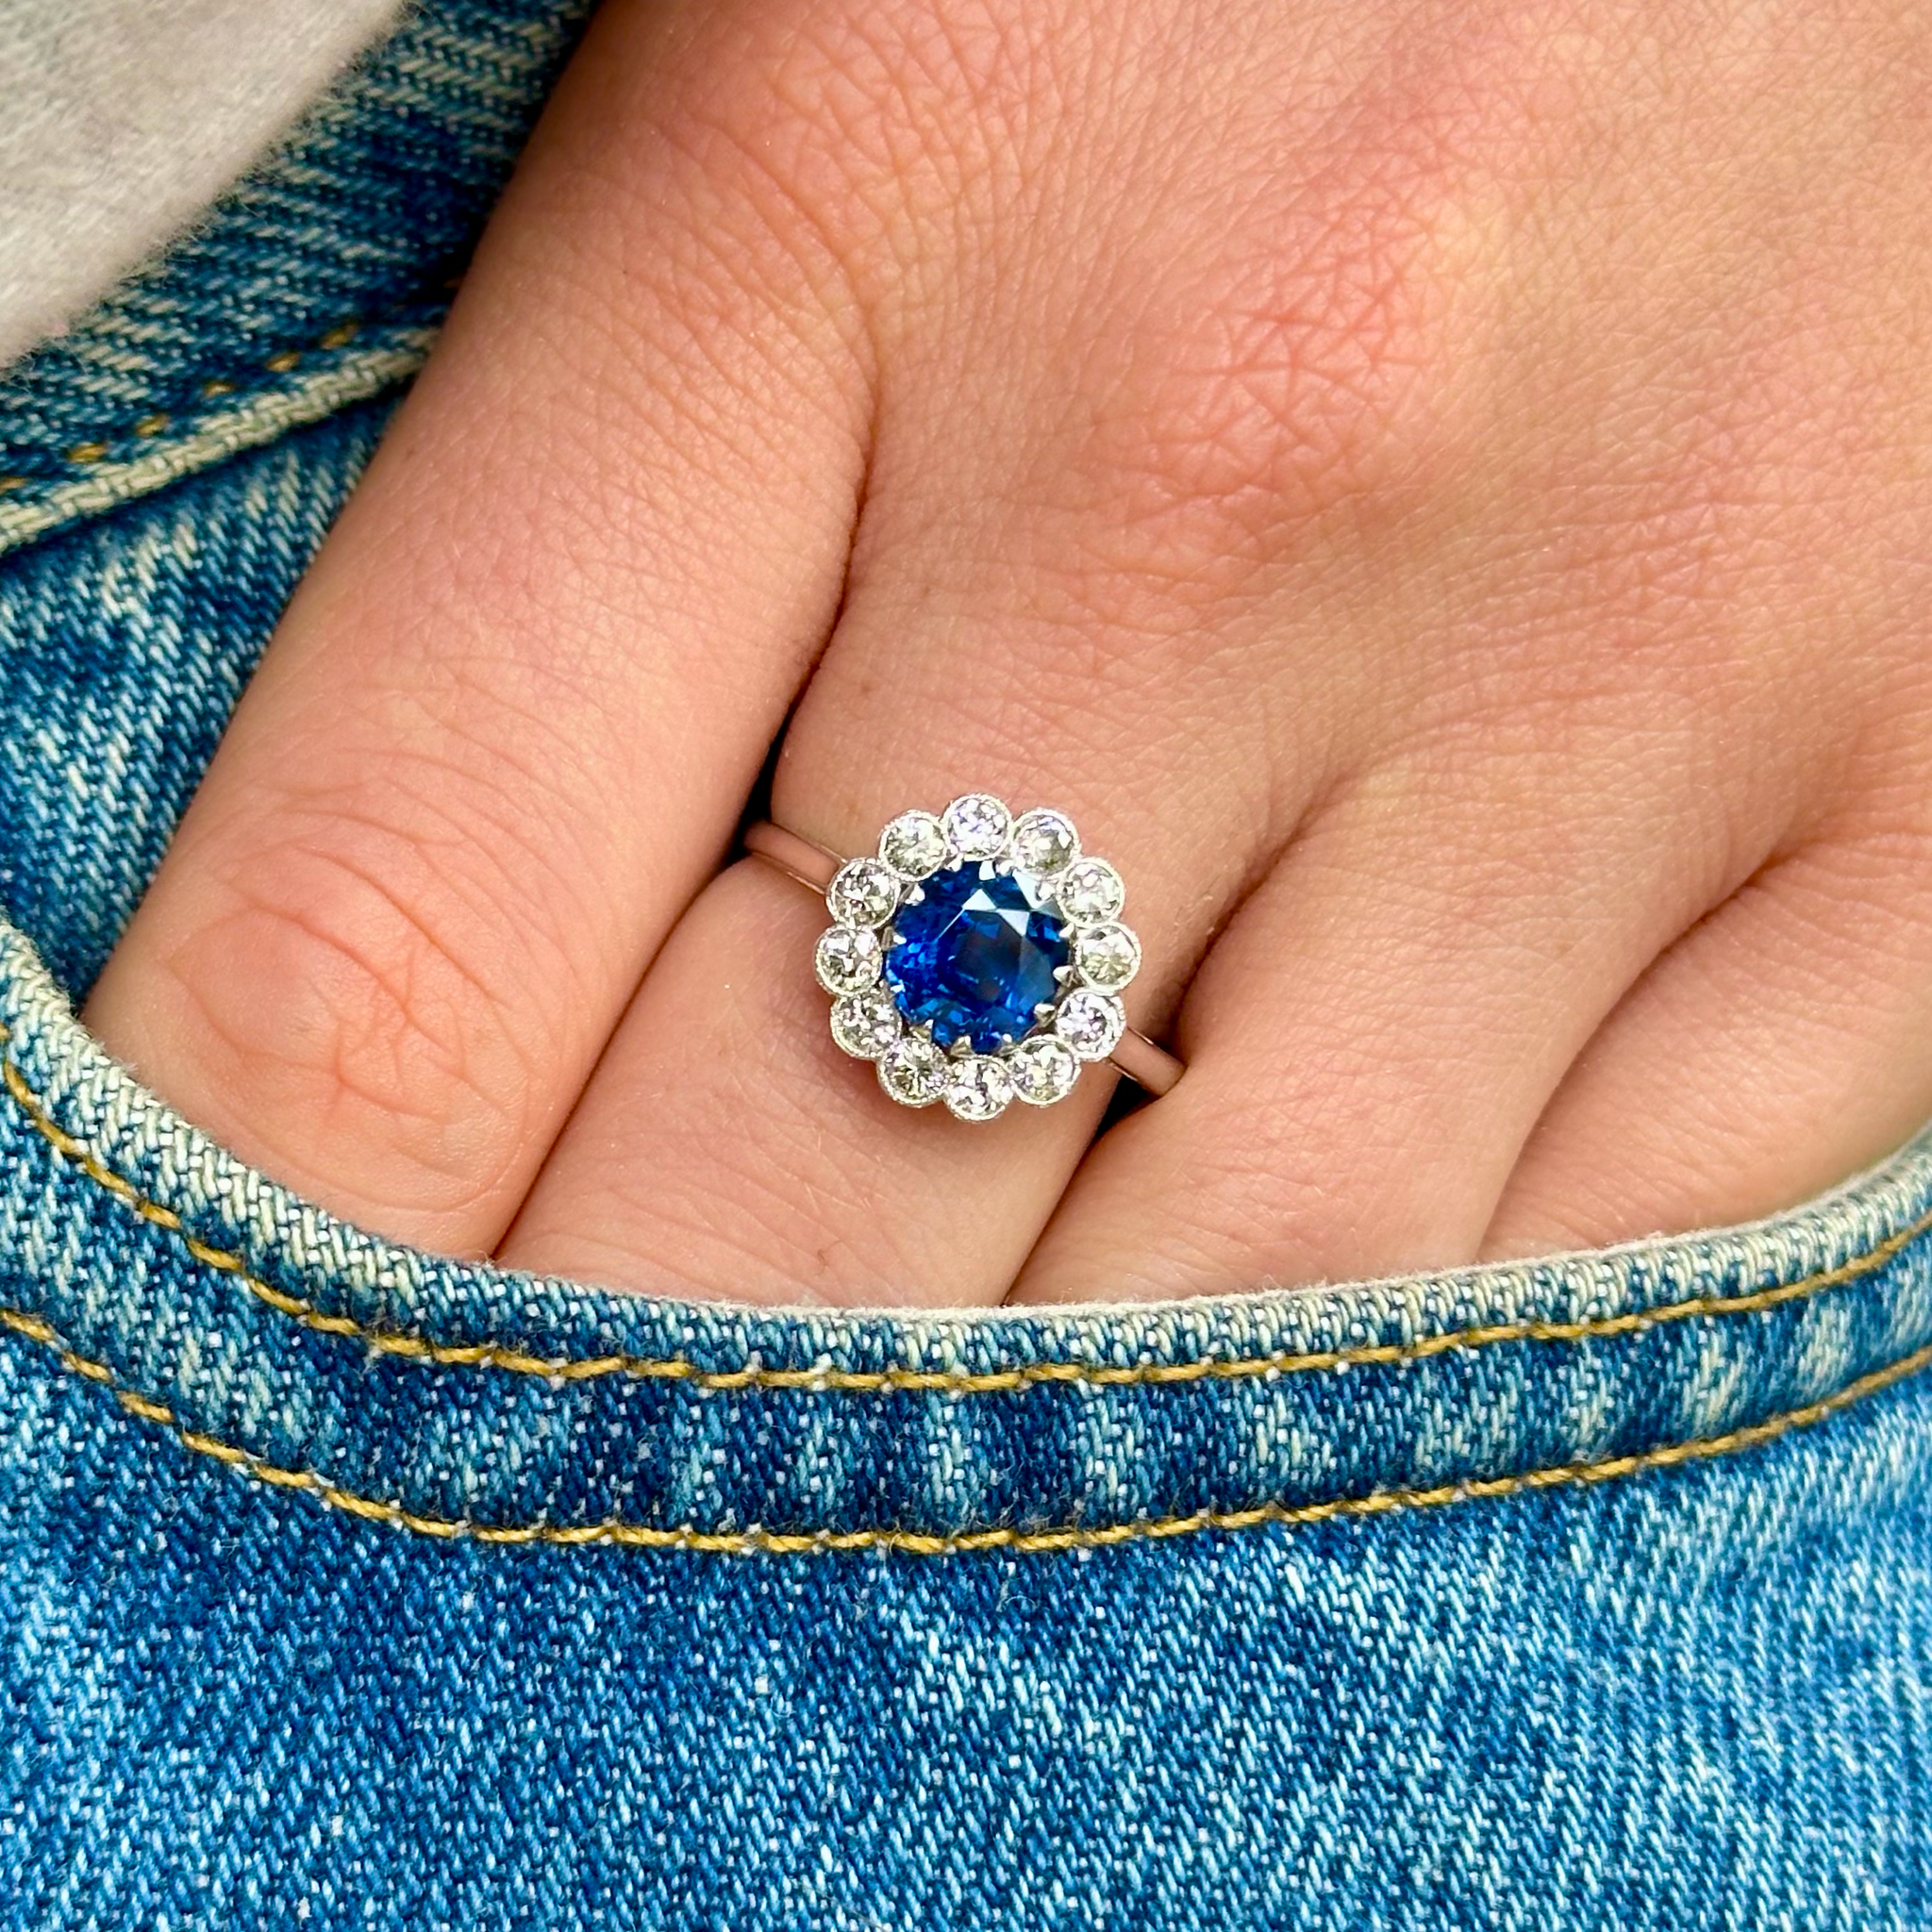 Antique, Edwardian Sapphire and Diamond Daisy Cluster Engagement Ring